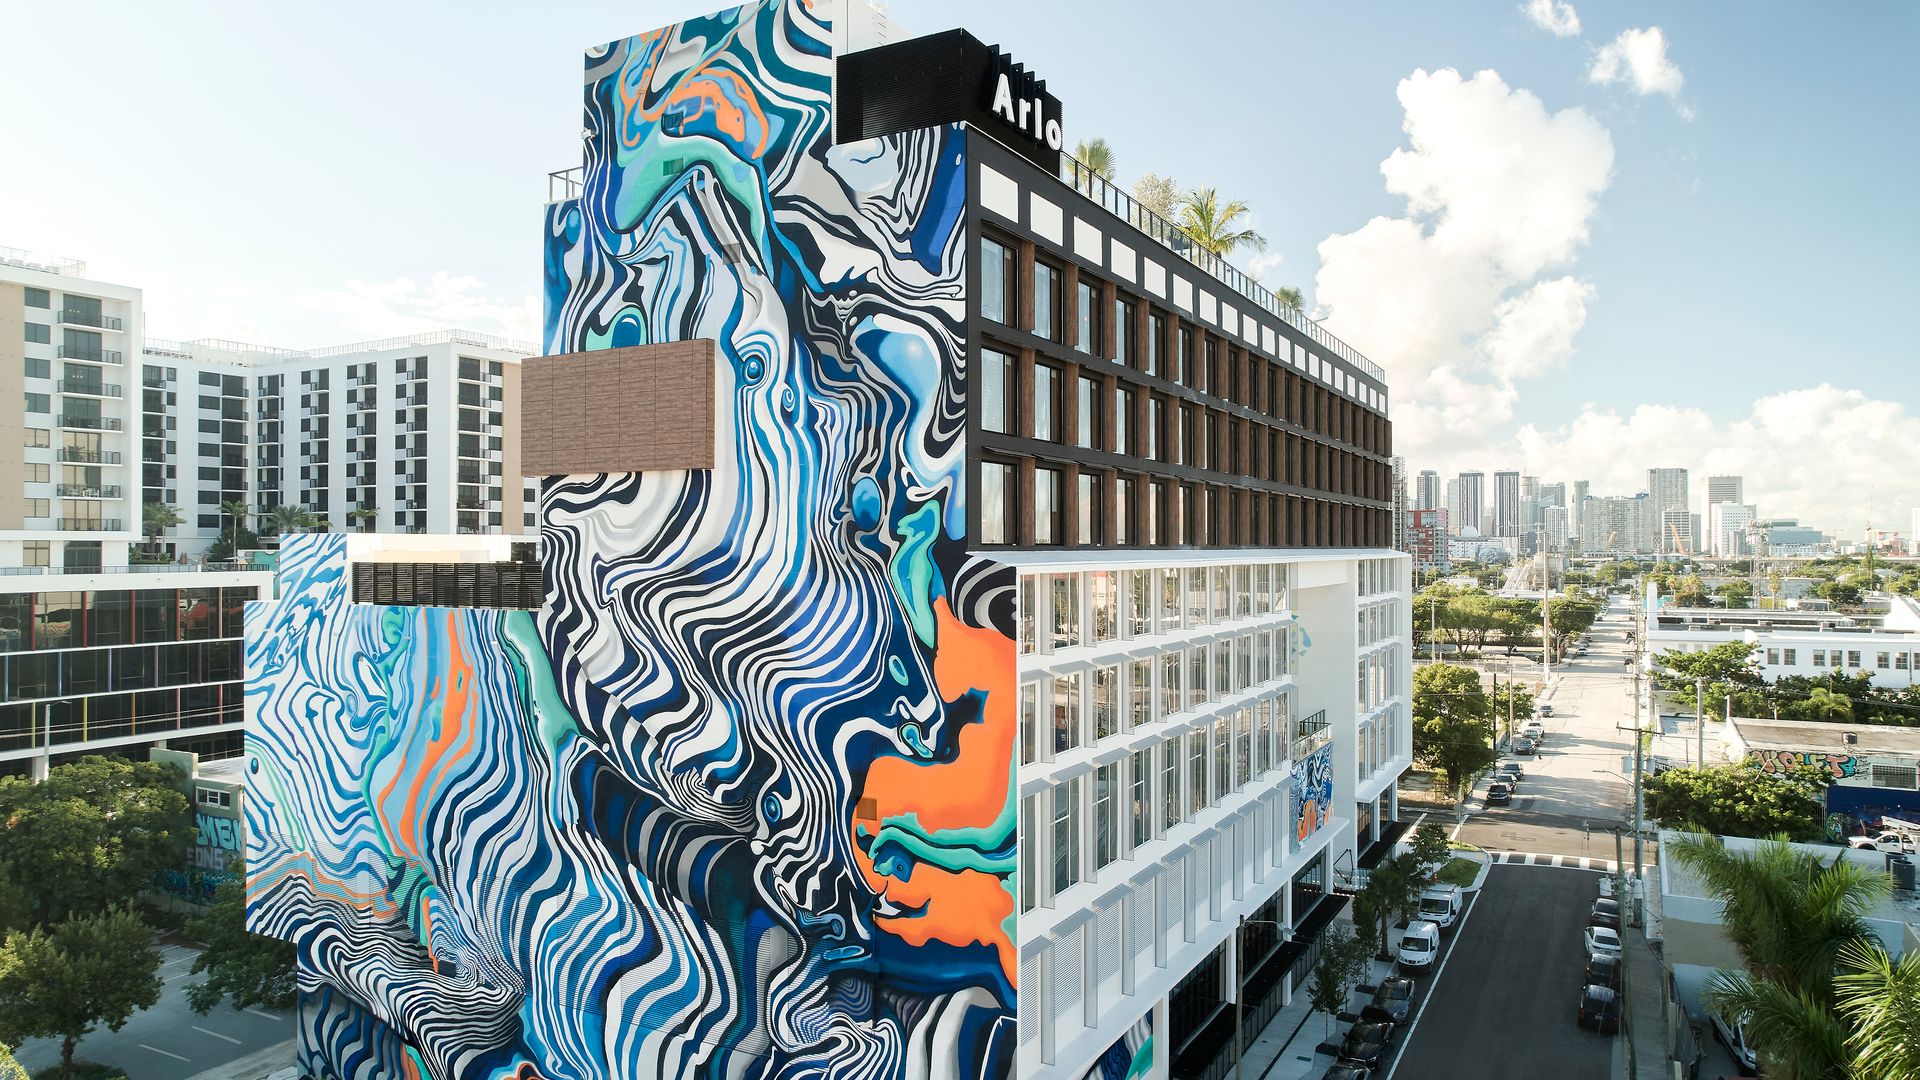 The exterior of the new Arlo hotel, with a bright, abstract mural appearing like ink in water, painted on its side.